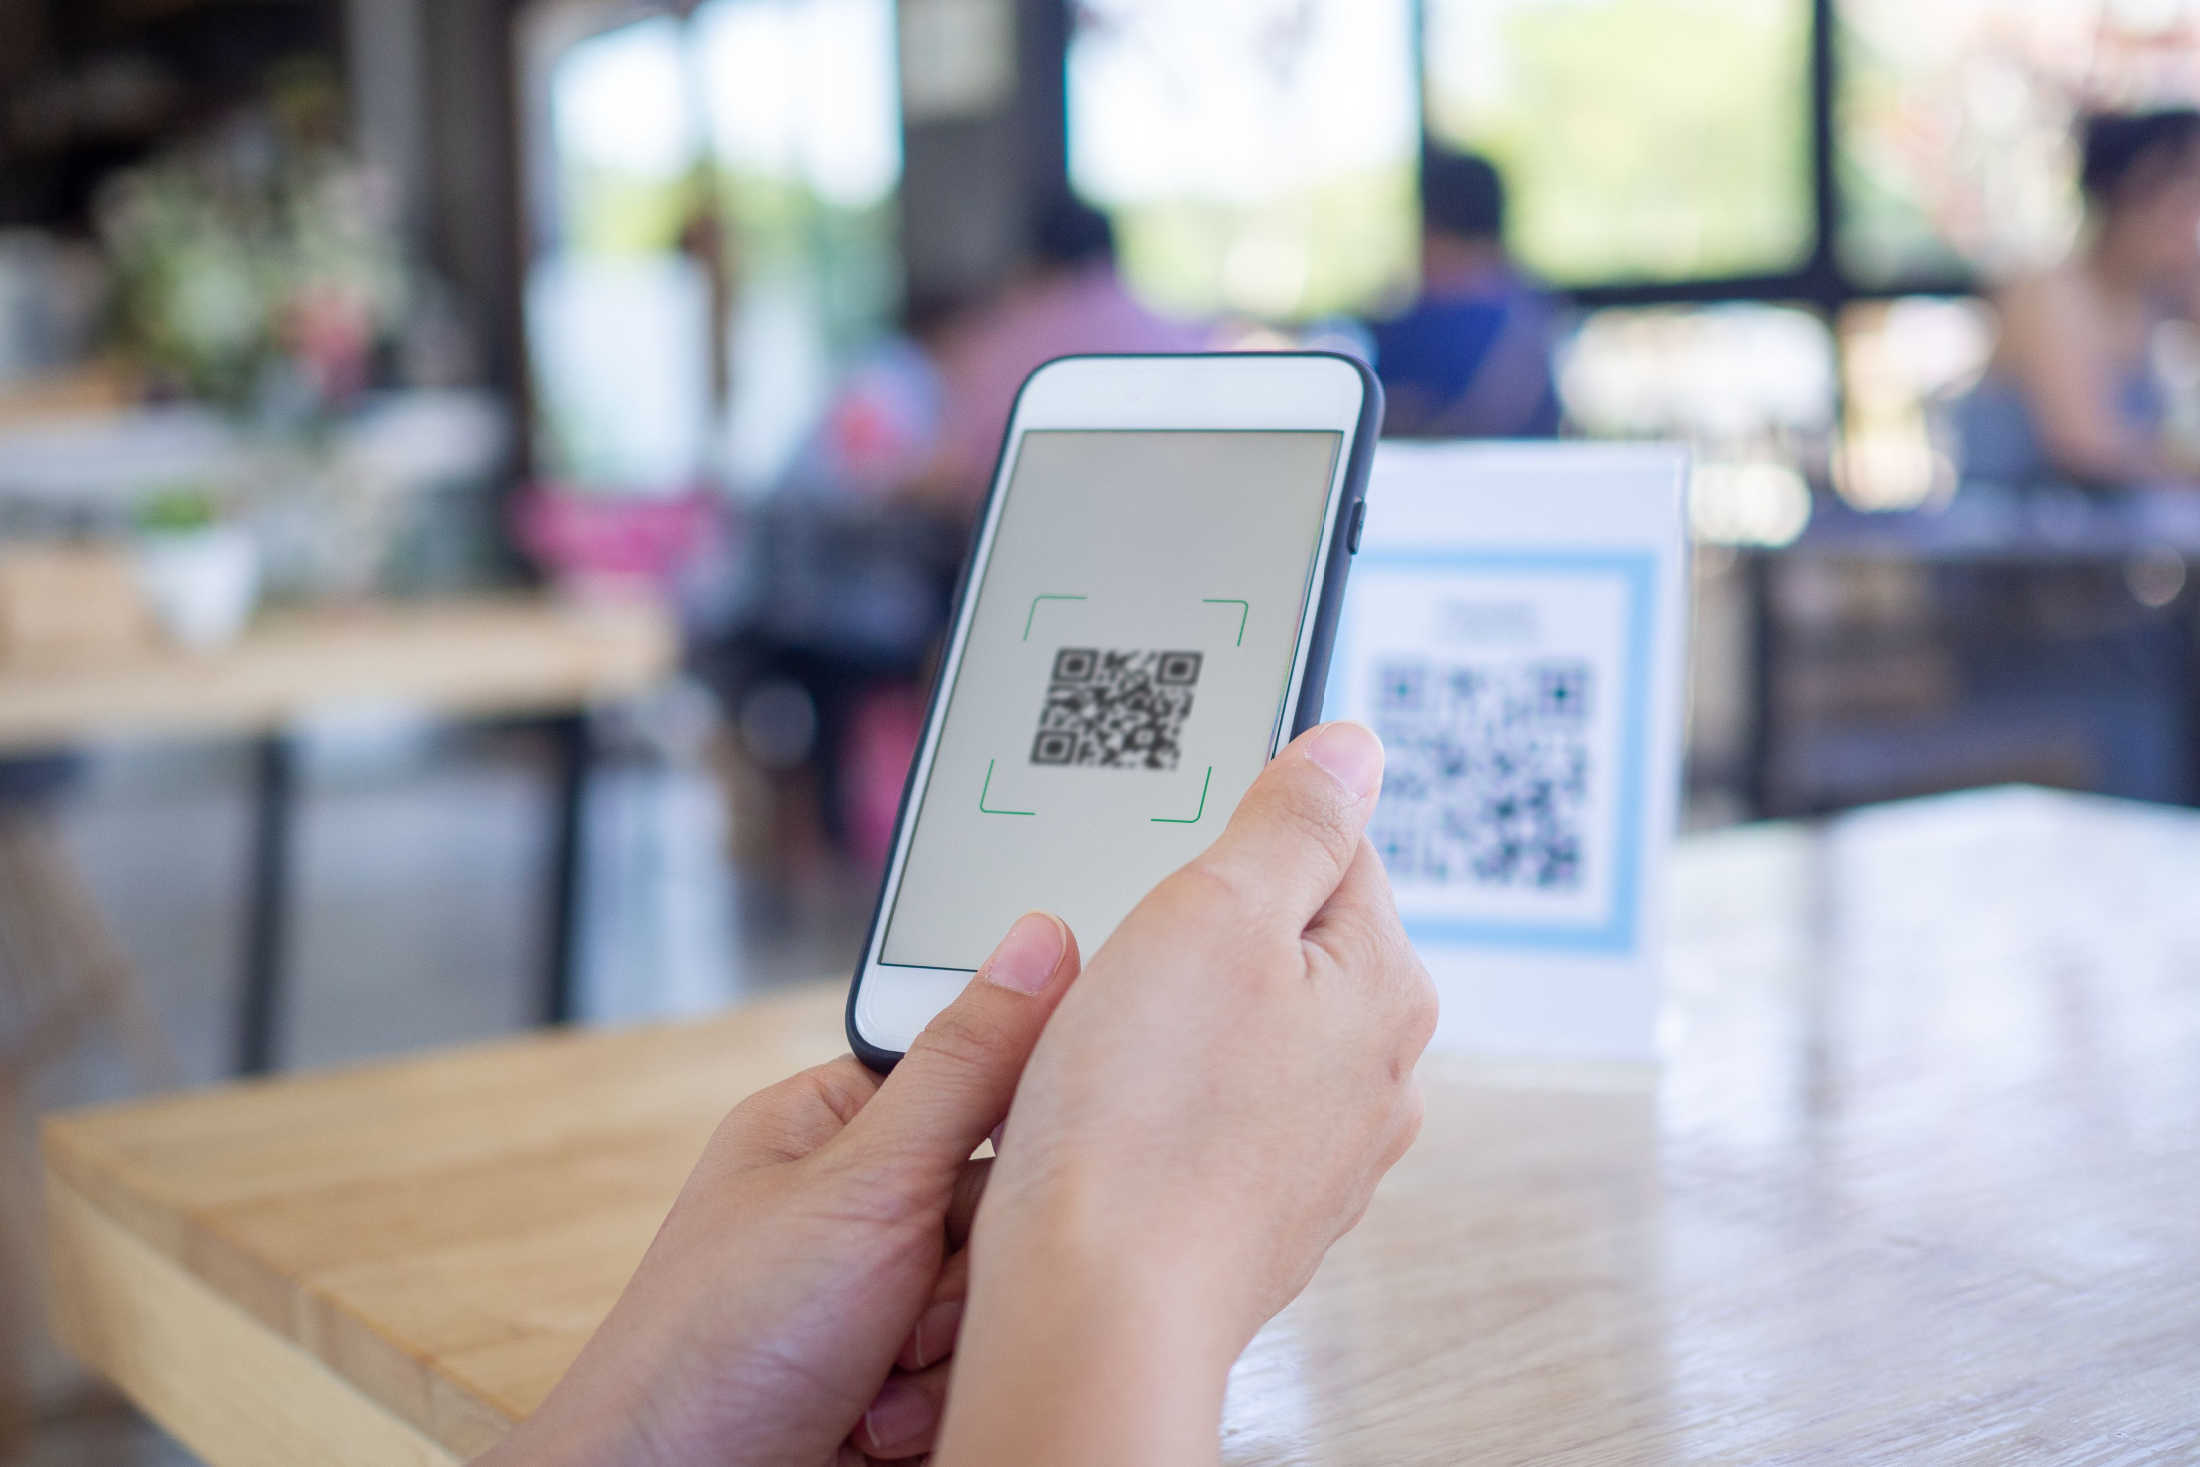 Female using digital transformation services to scan a QR code on her smartphone at a restaurant table to access the menu.